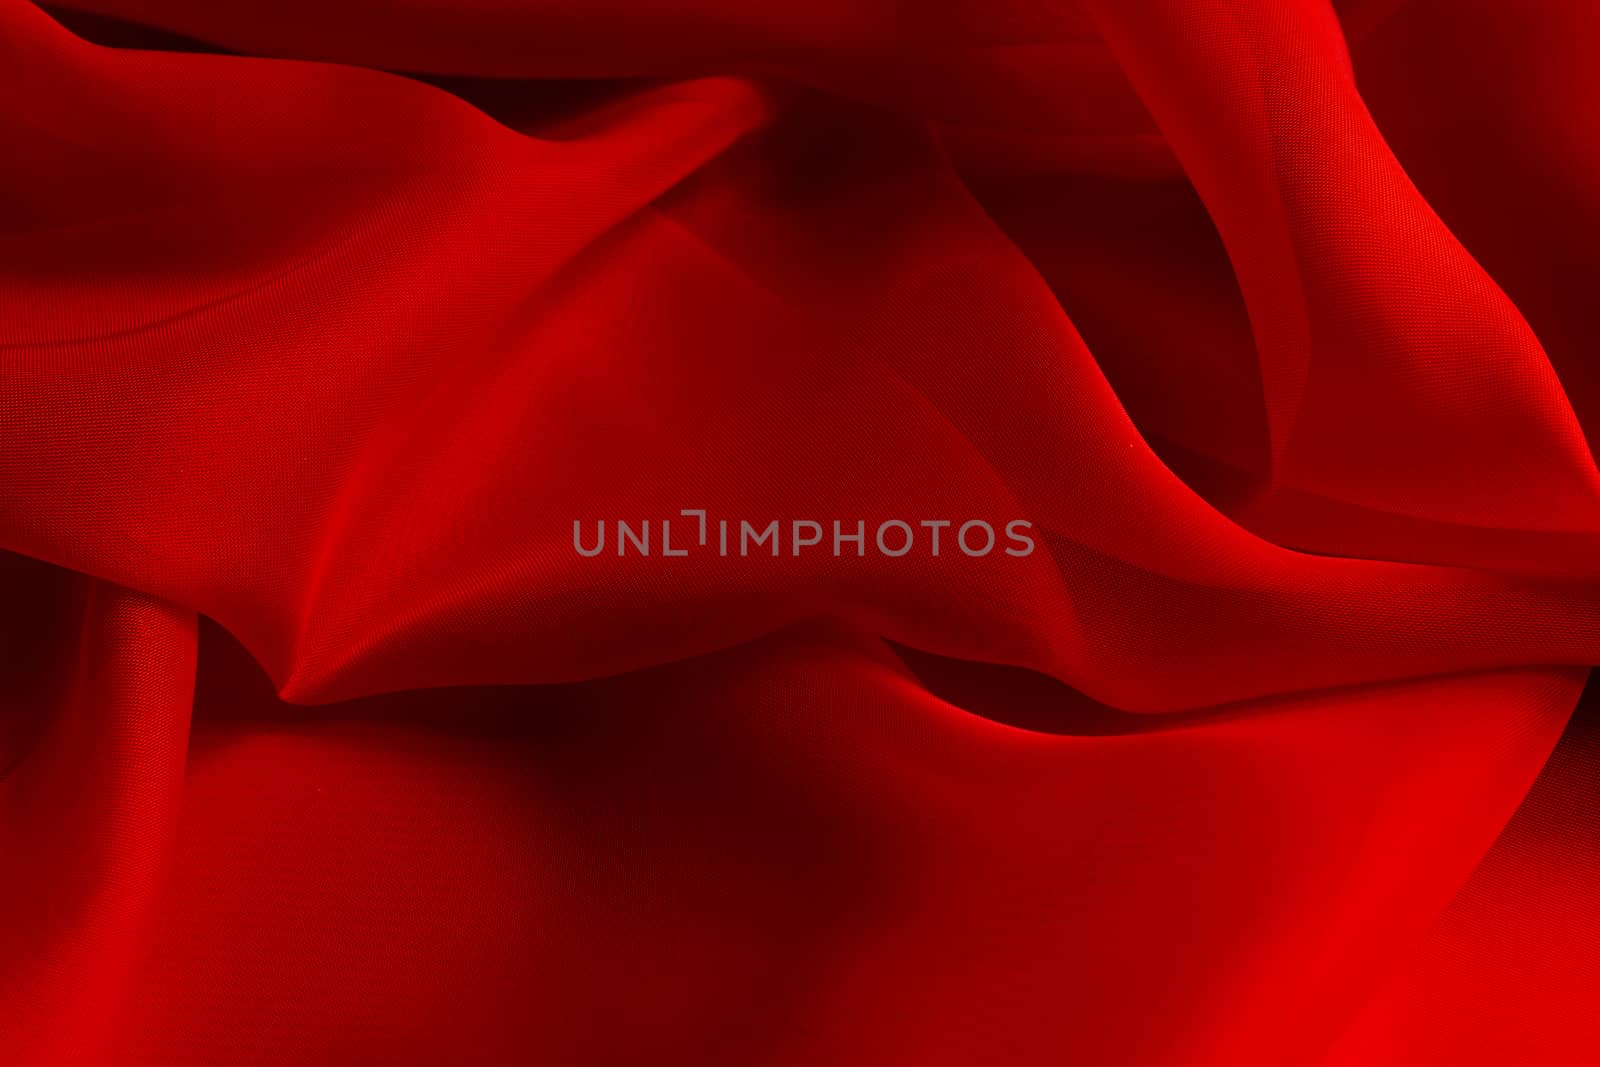 the texture of the red fabric from the delicate chiffon